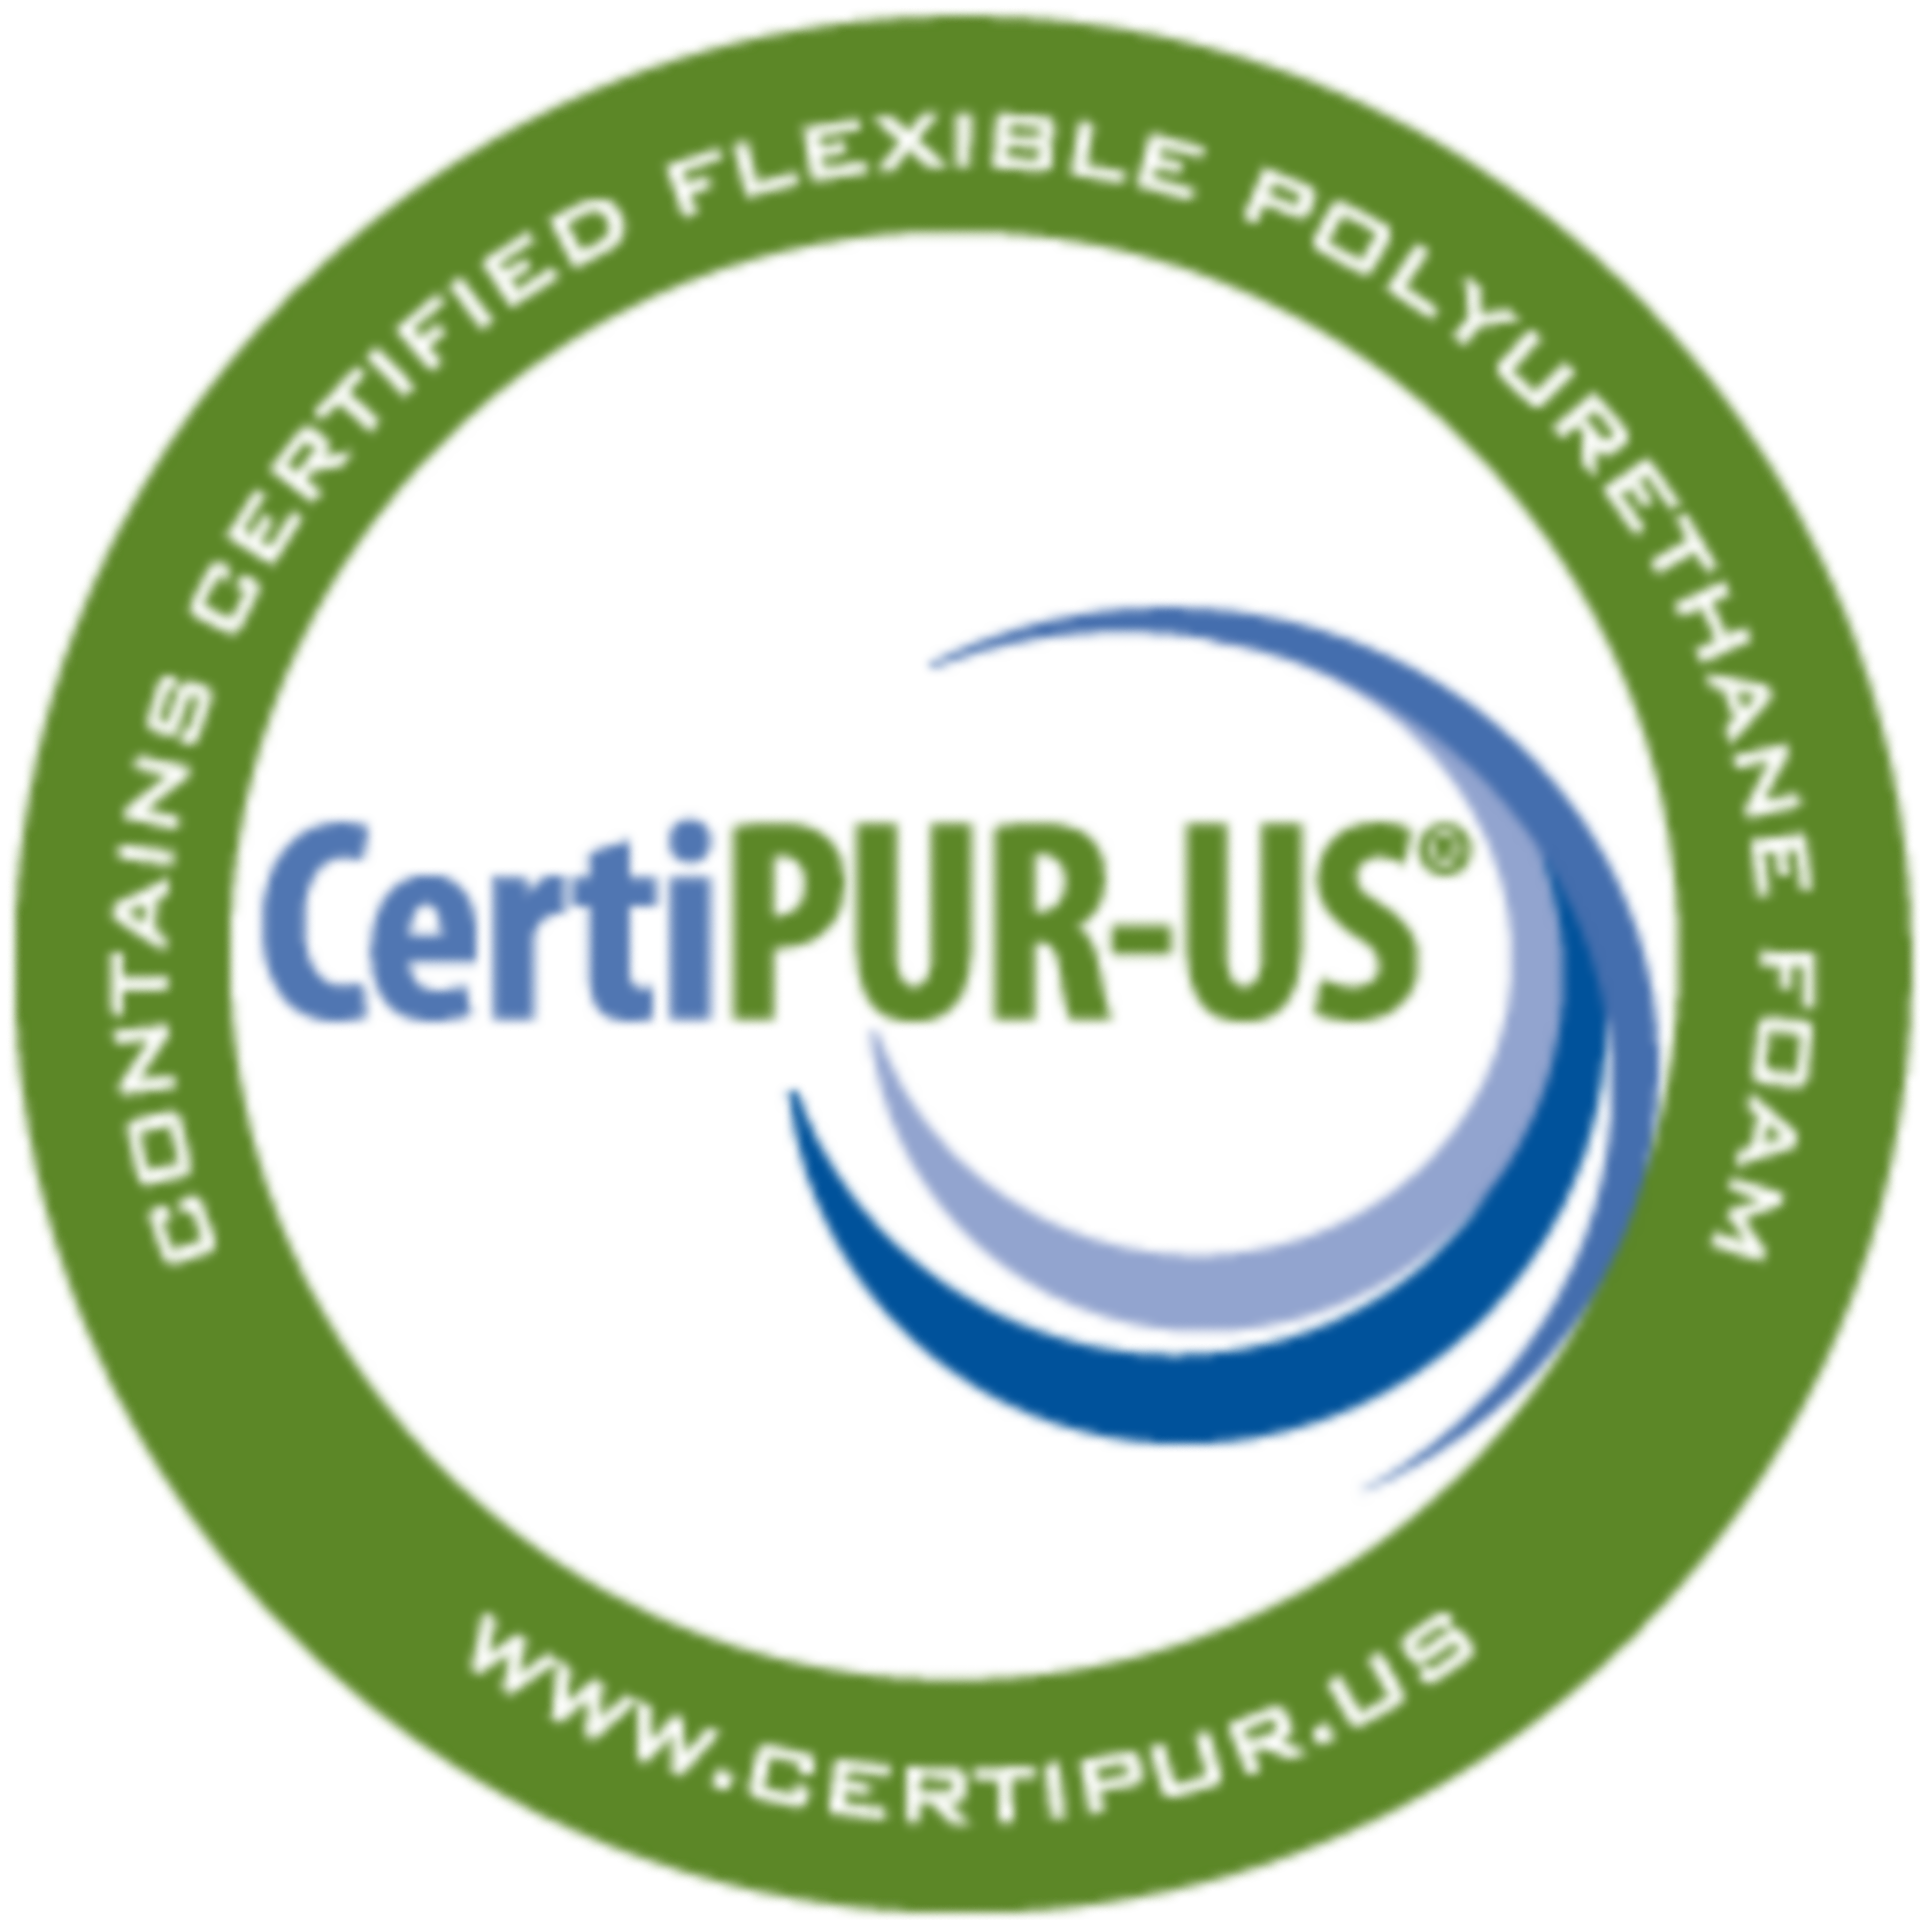 Contains Certified Flexible Polyurethane Foam - CertiPUR-US